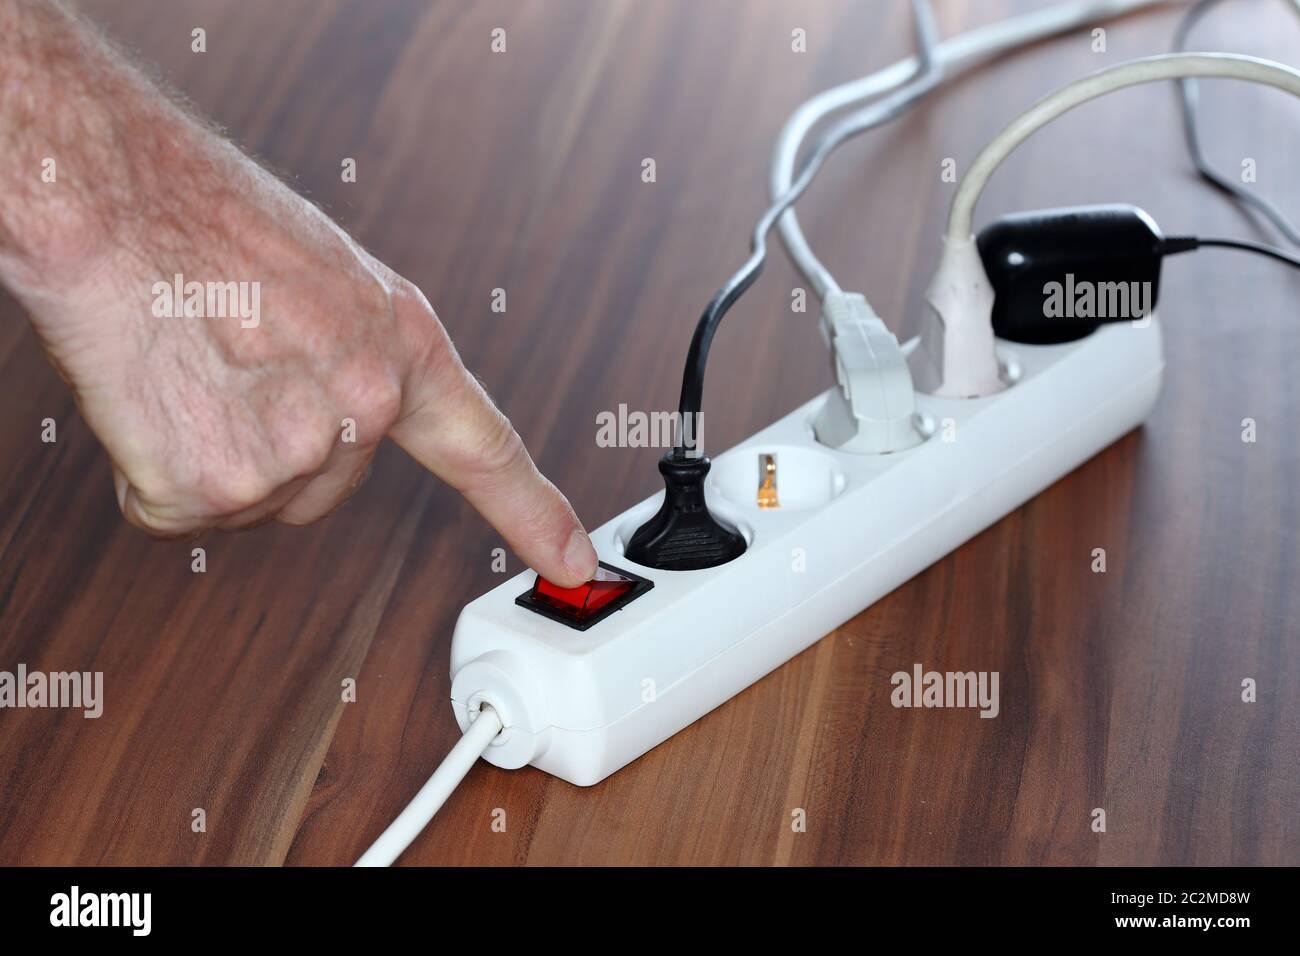 shut down a device with switch, save energy Stock Photo